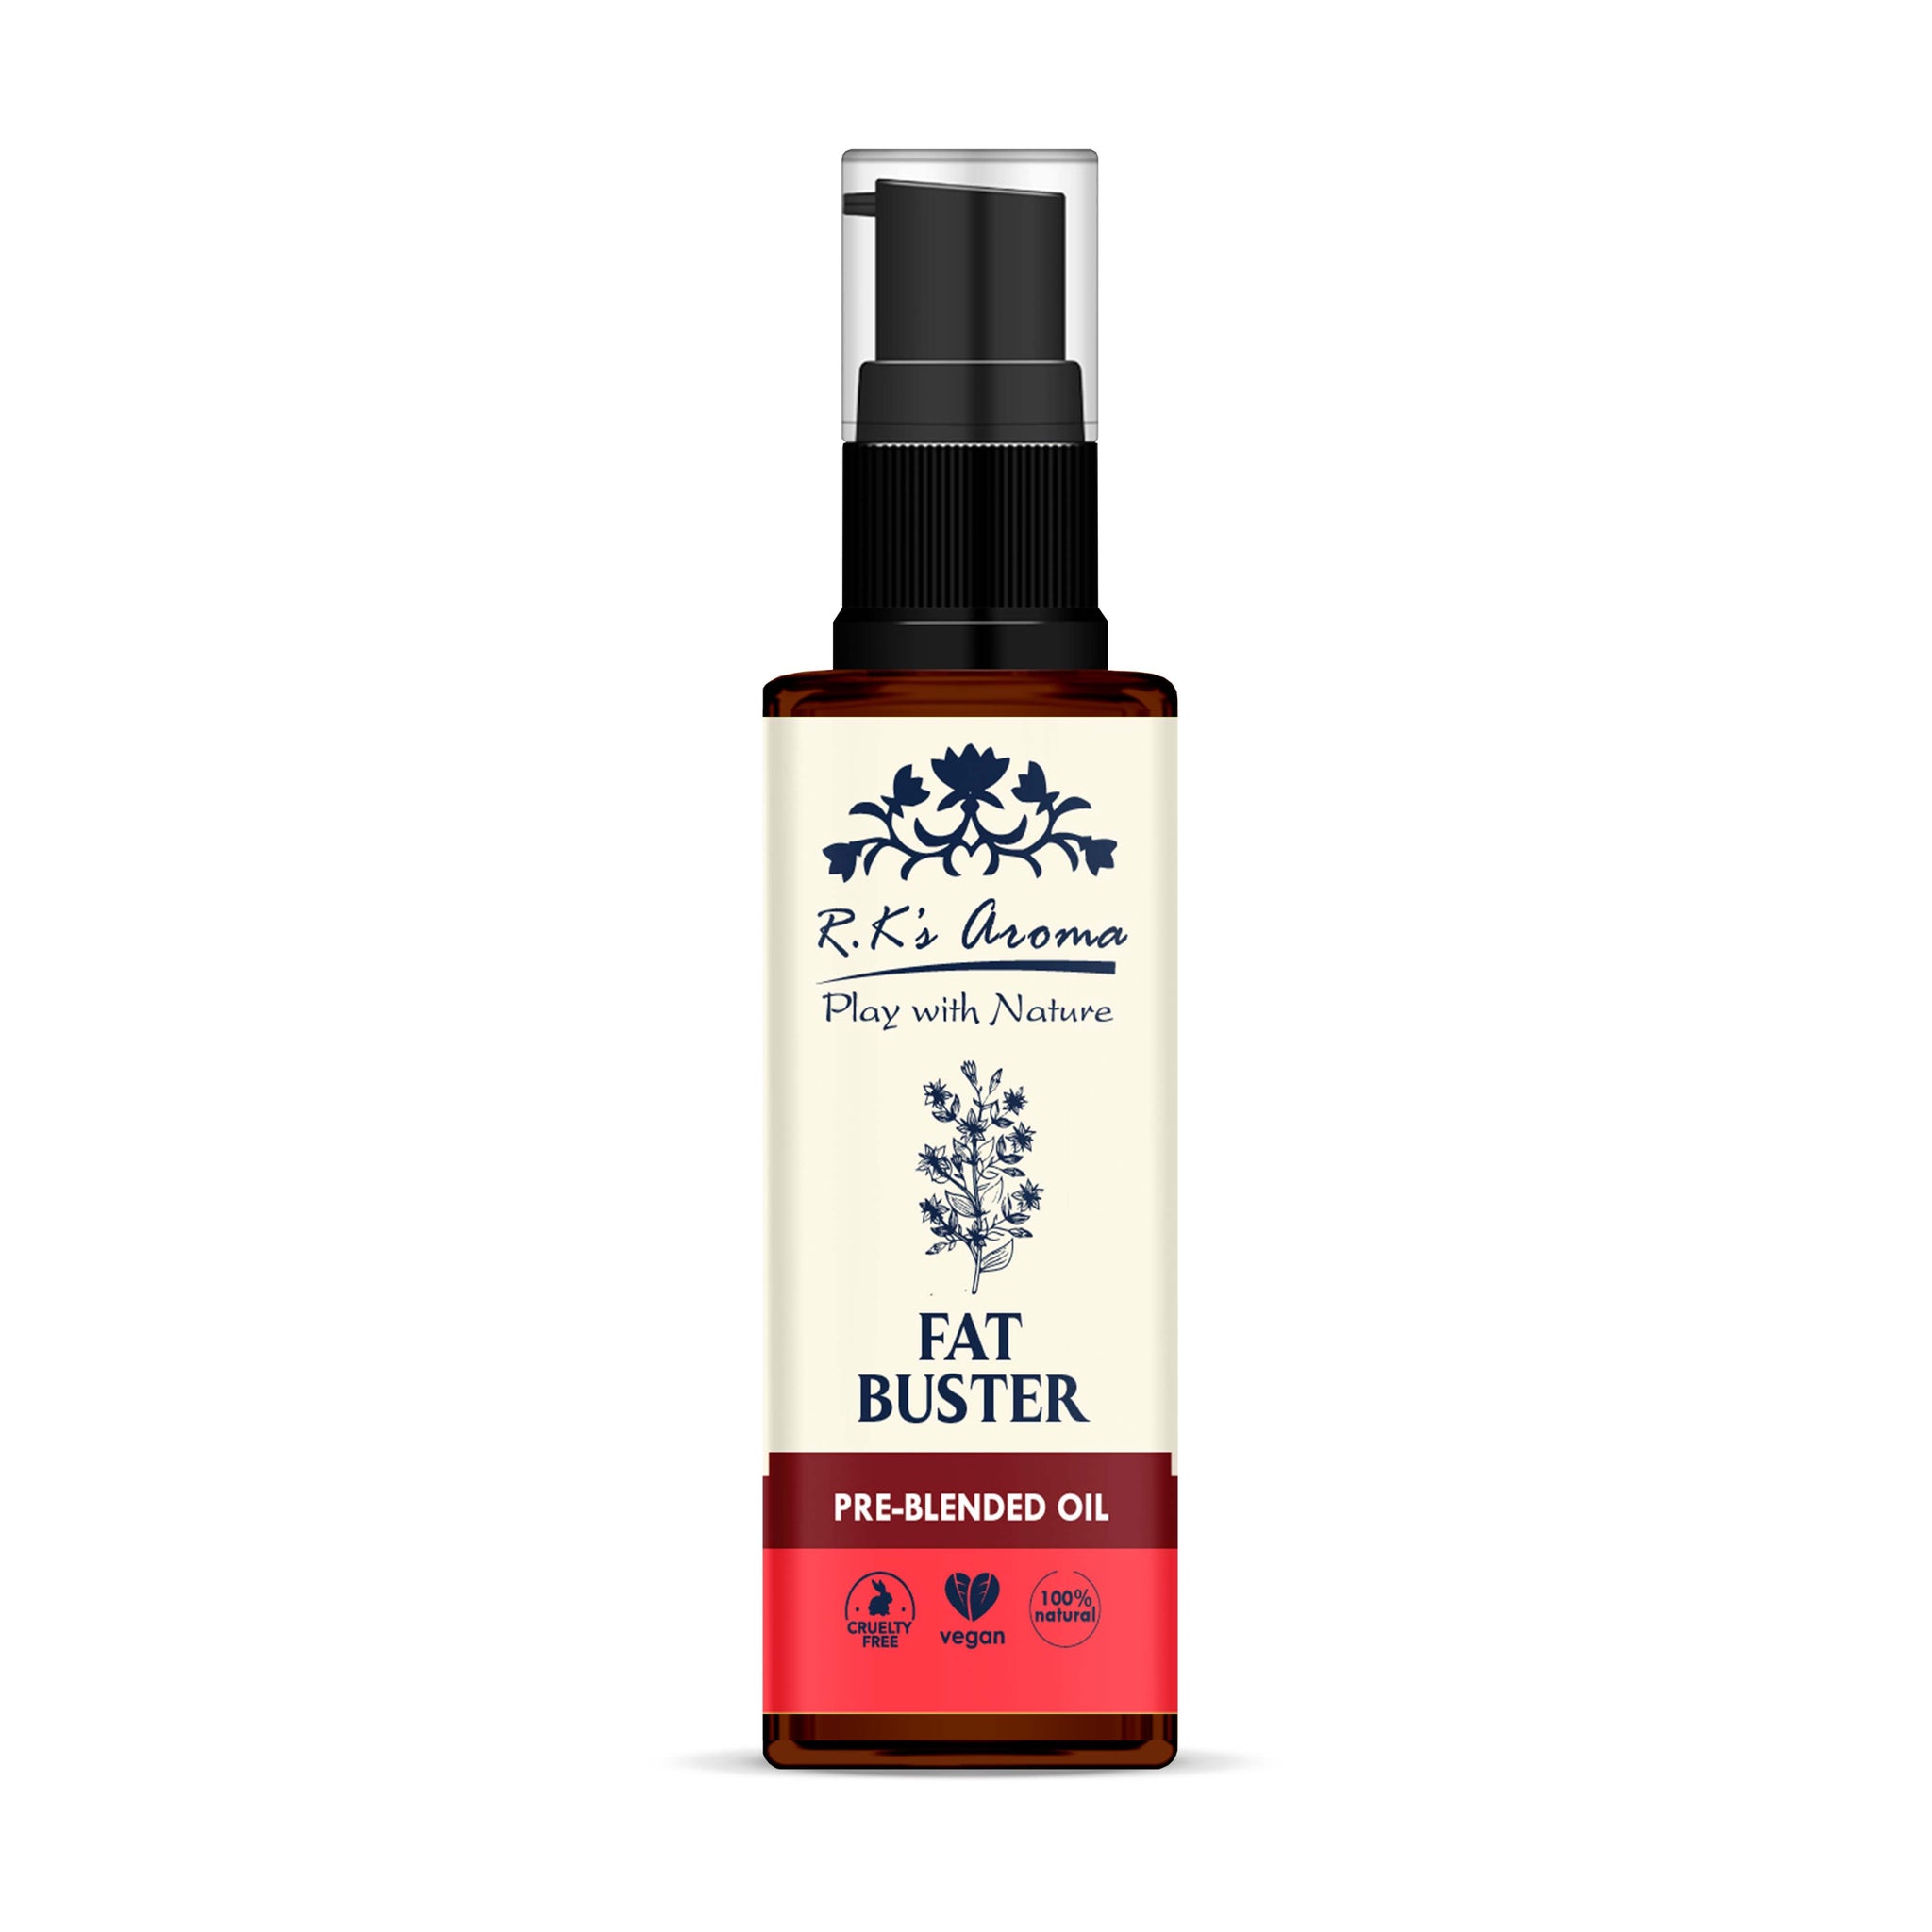 Fat Buster (Body) Oil